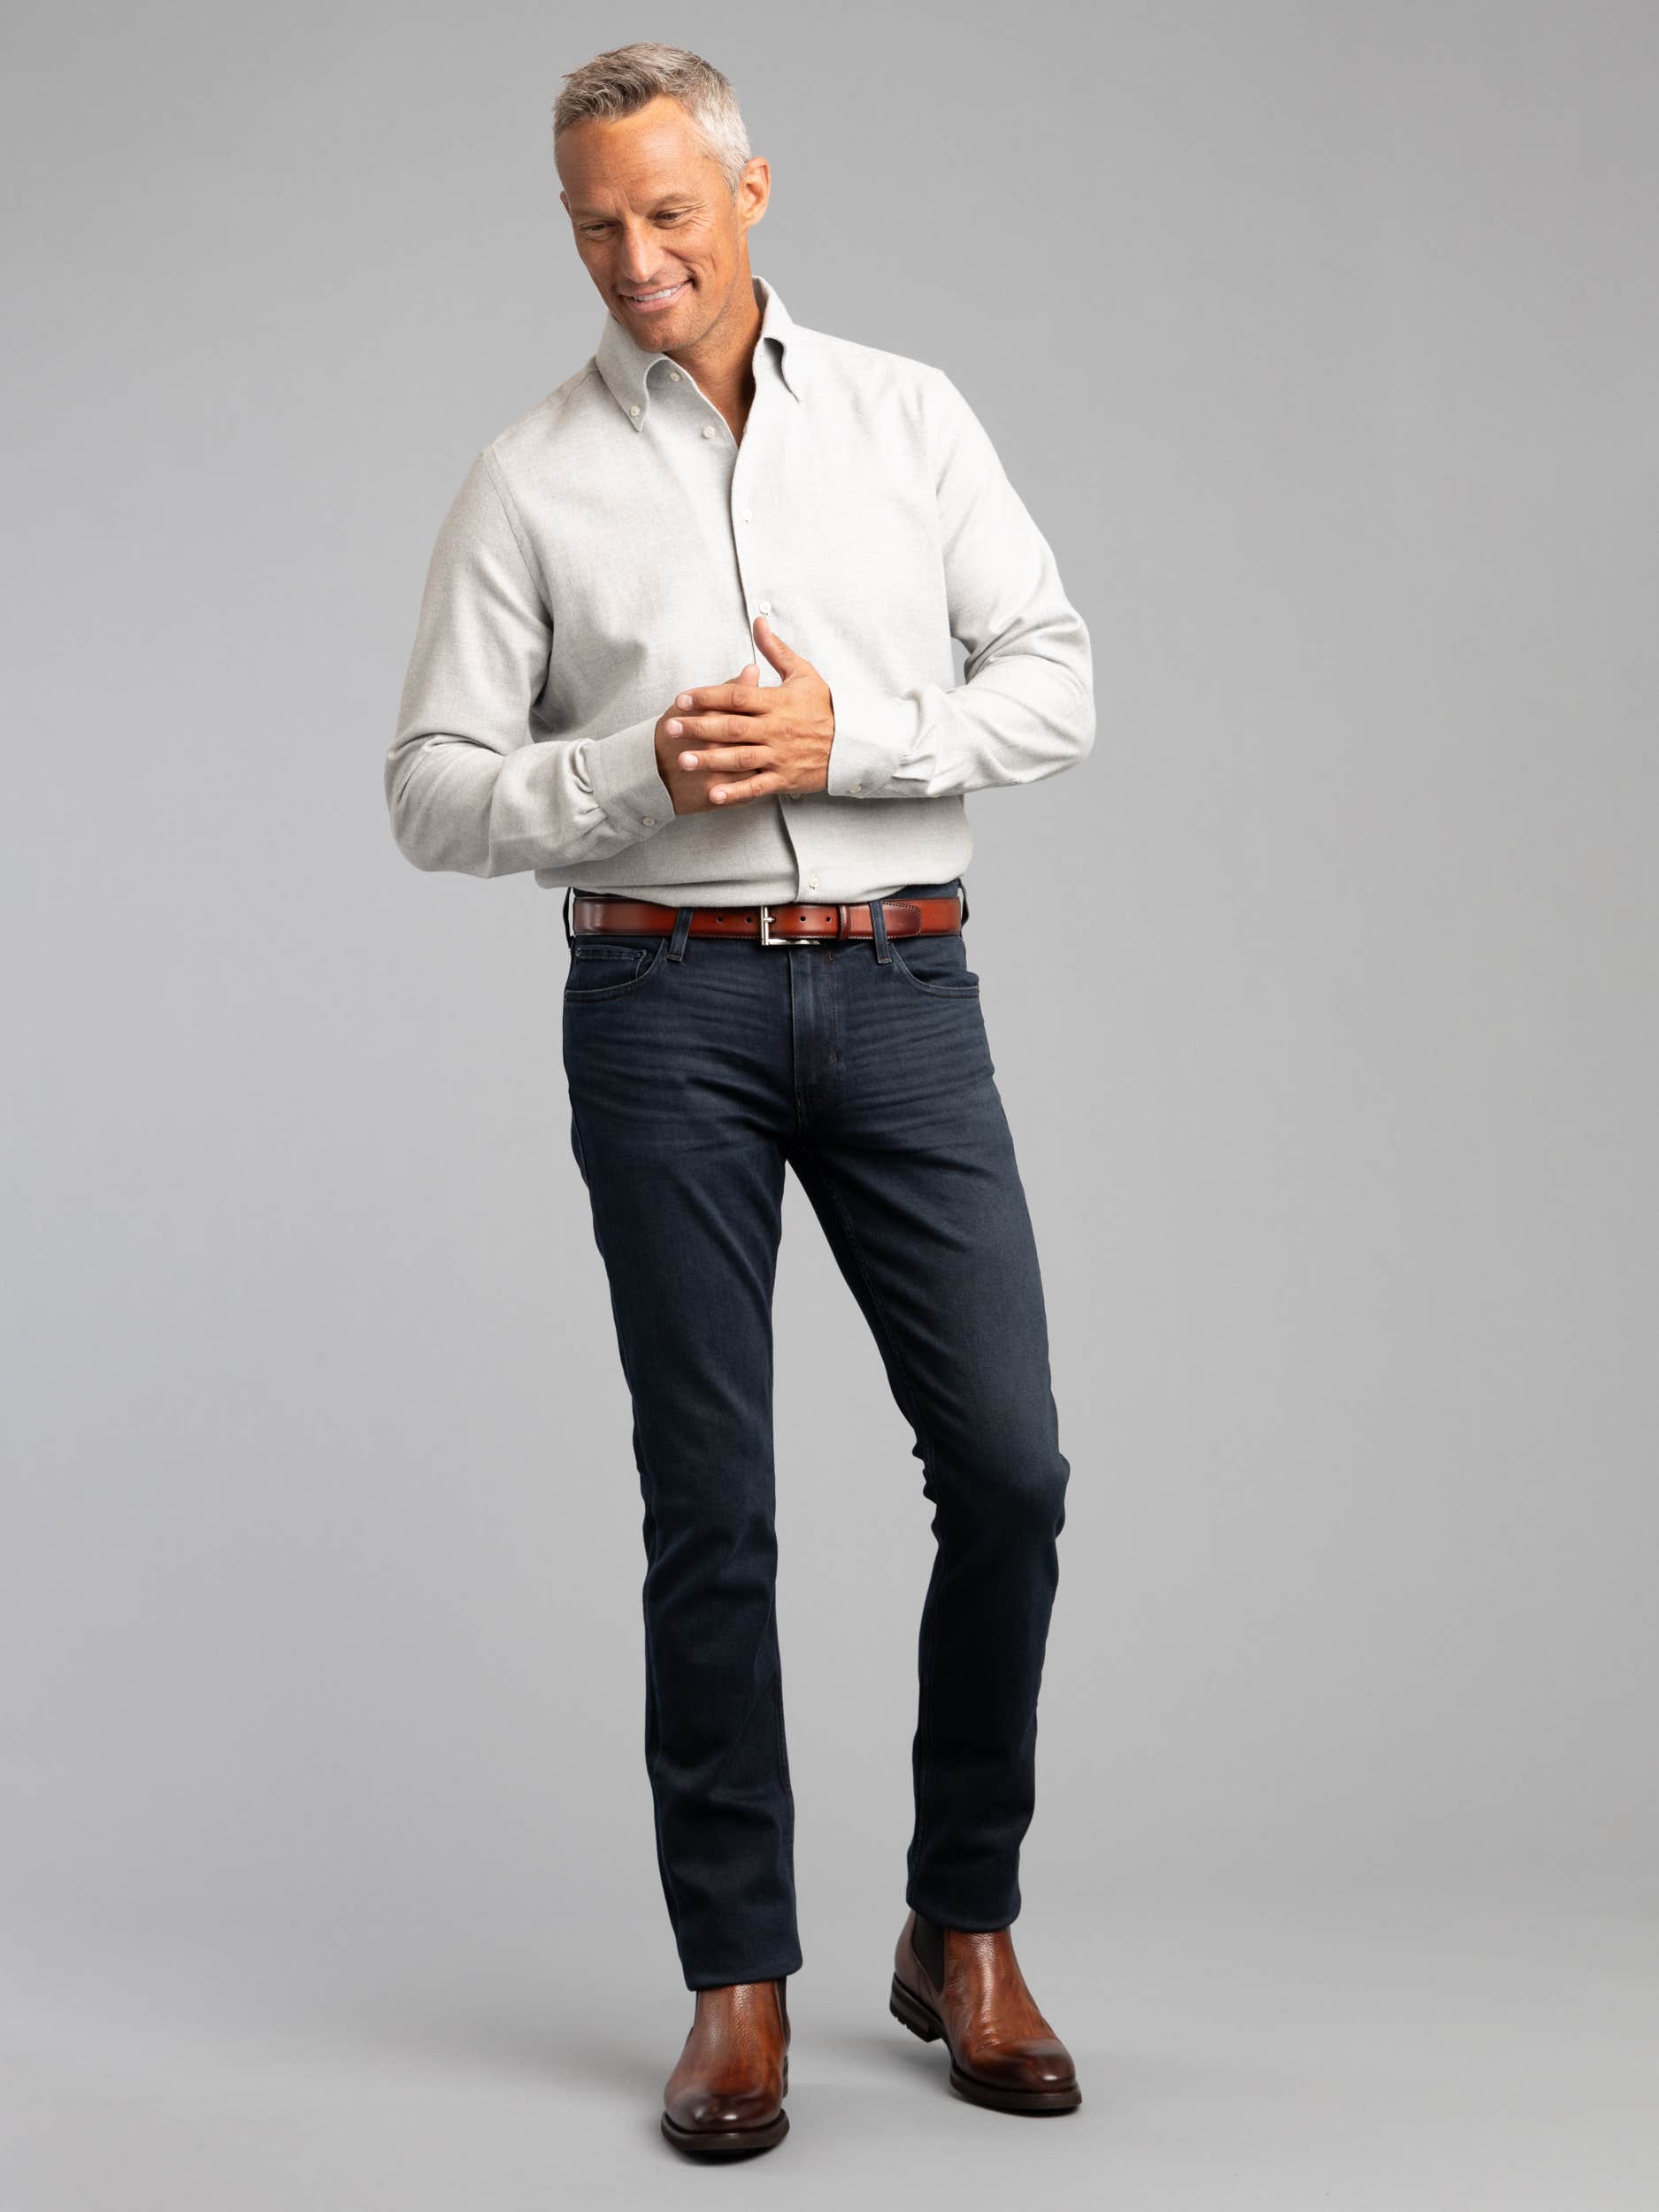 Best shirt colors with charcoal gray pants